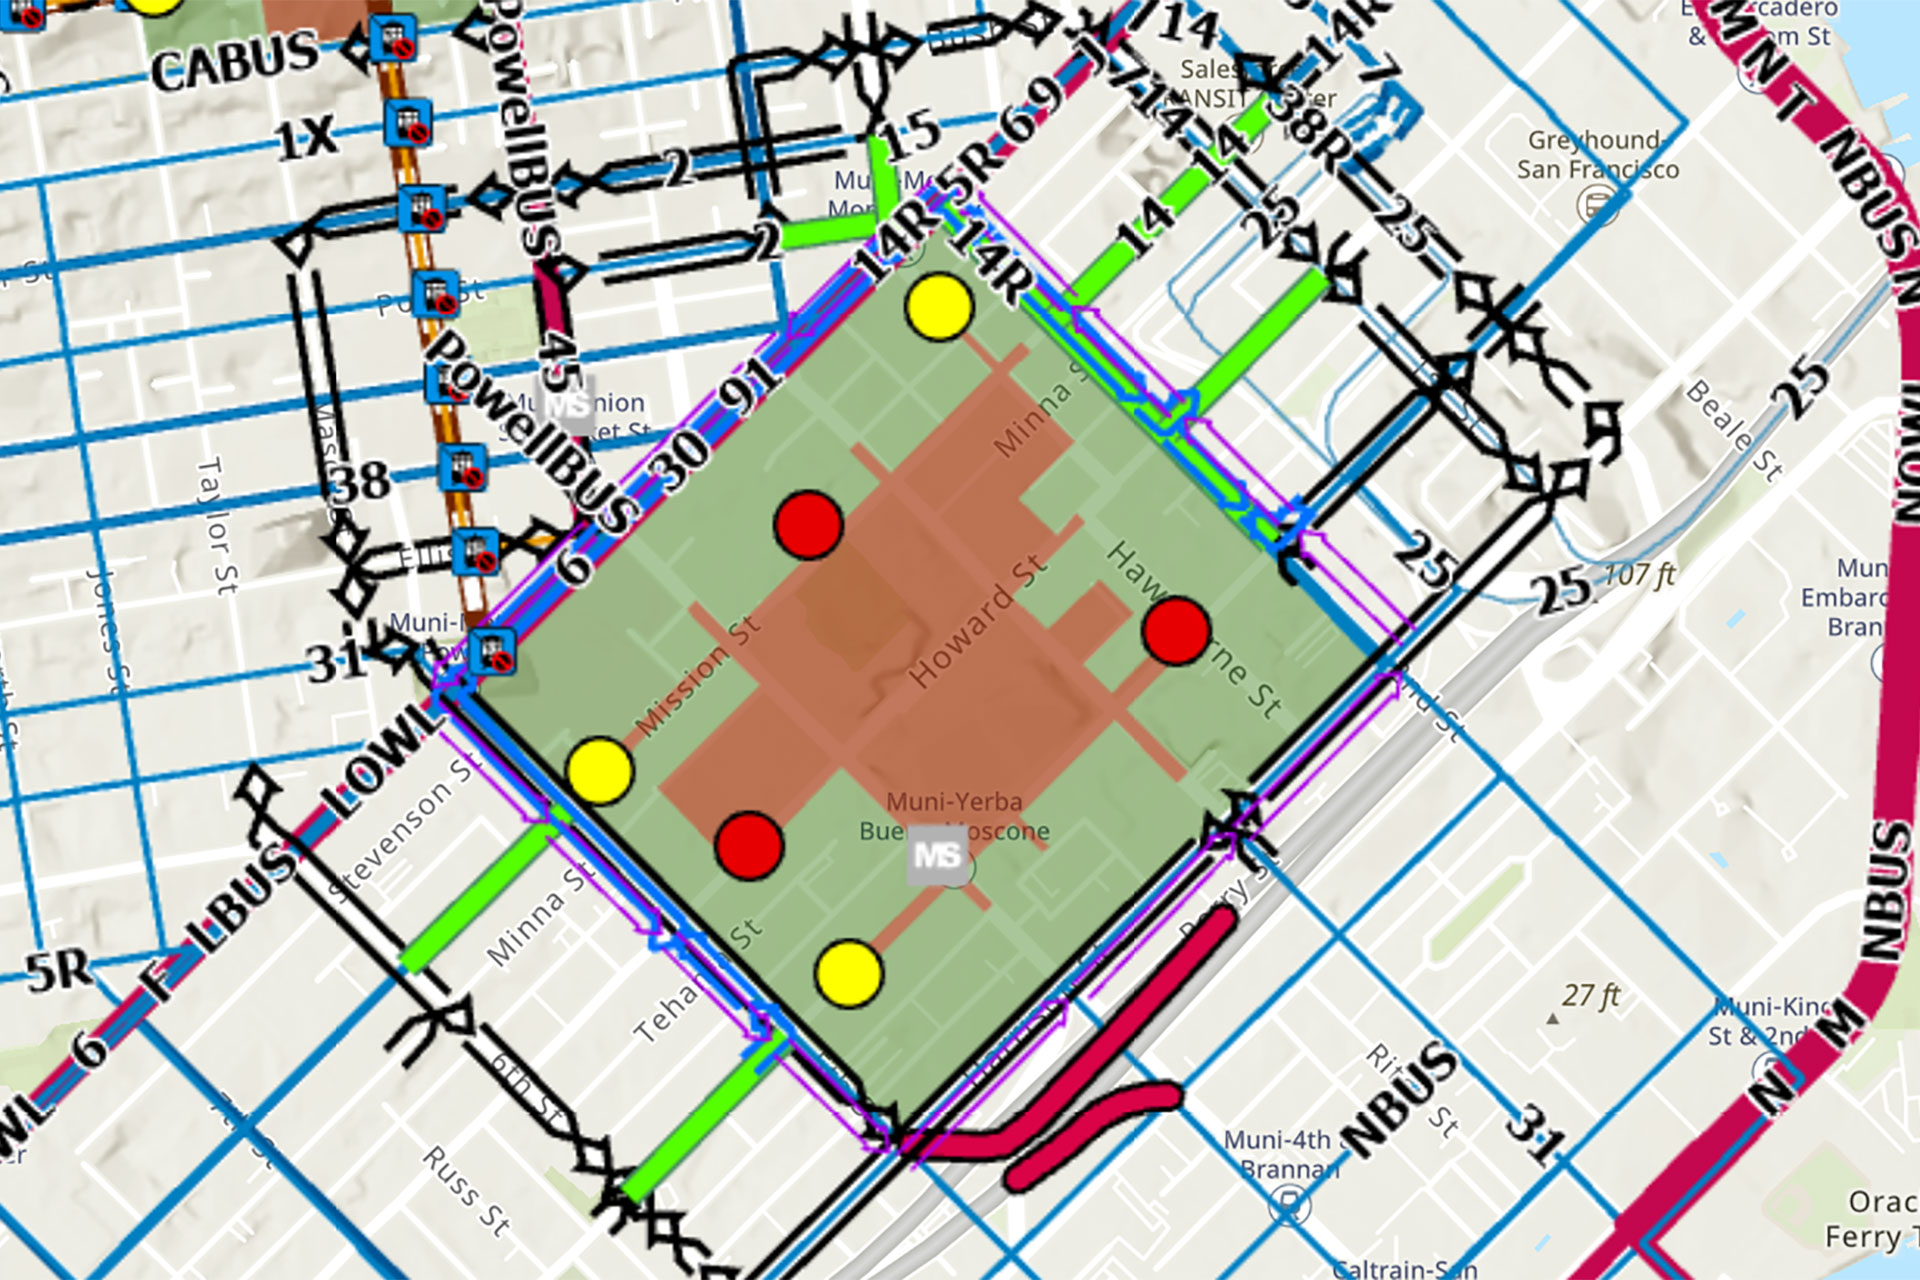 A map of downtown San Francisco showing the red and green zones around Moscone Center